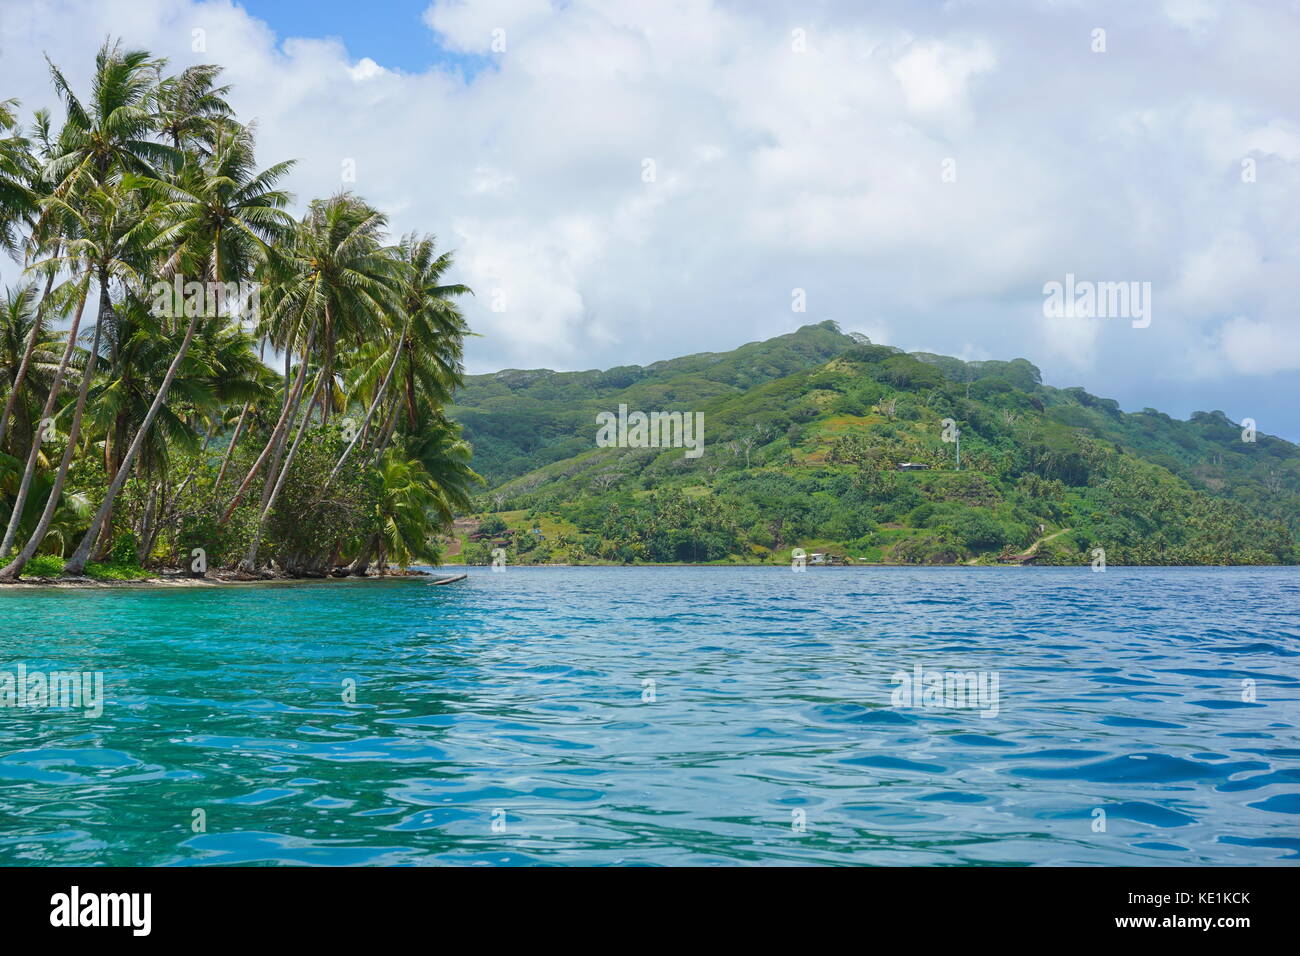 French Polynesia Huahine island coastal landscape with coconut palm trees seen from the lagoon near Faie, south Pacific ocean, Oceania Stock Photo